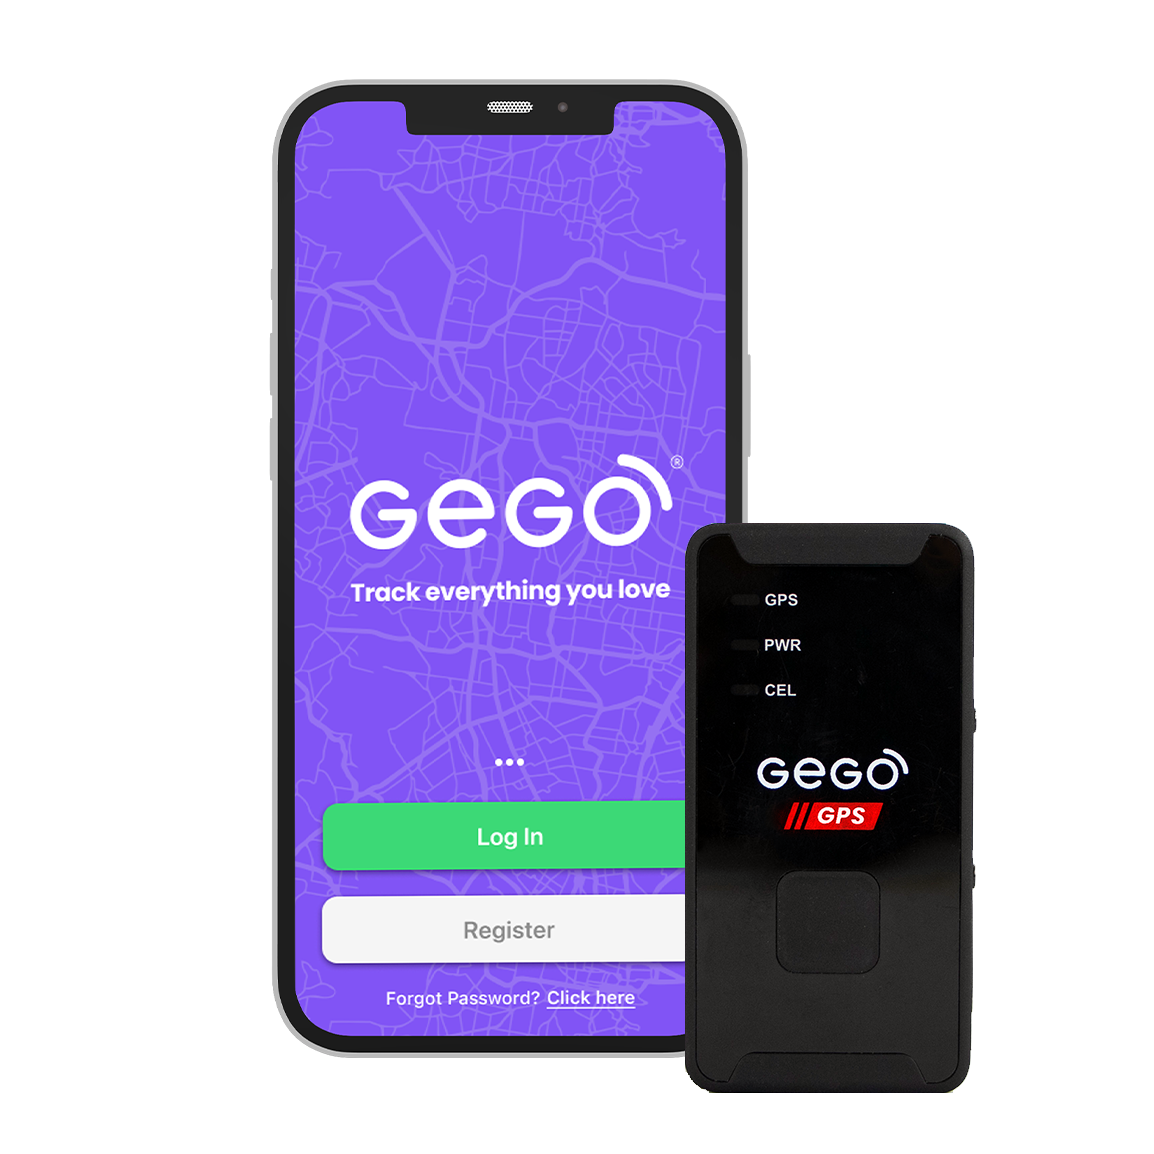 CYBER MONDAY DISCOUNT on GEGO GPS